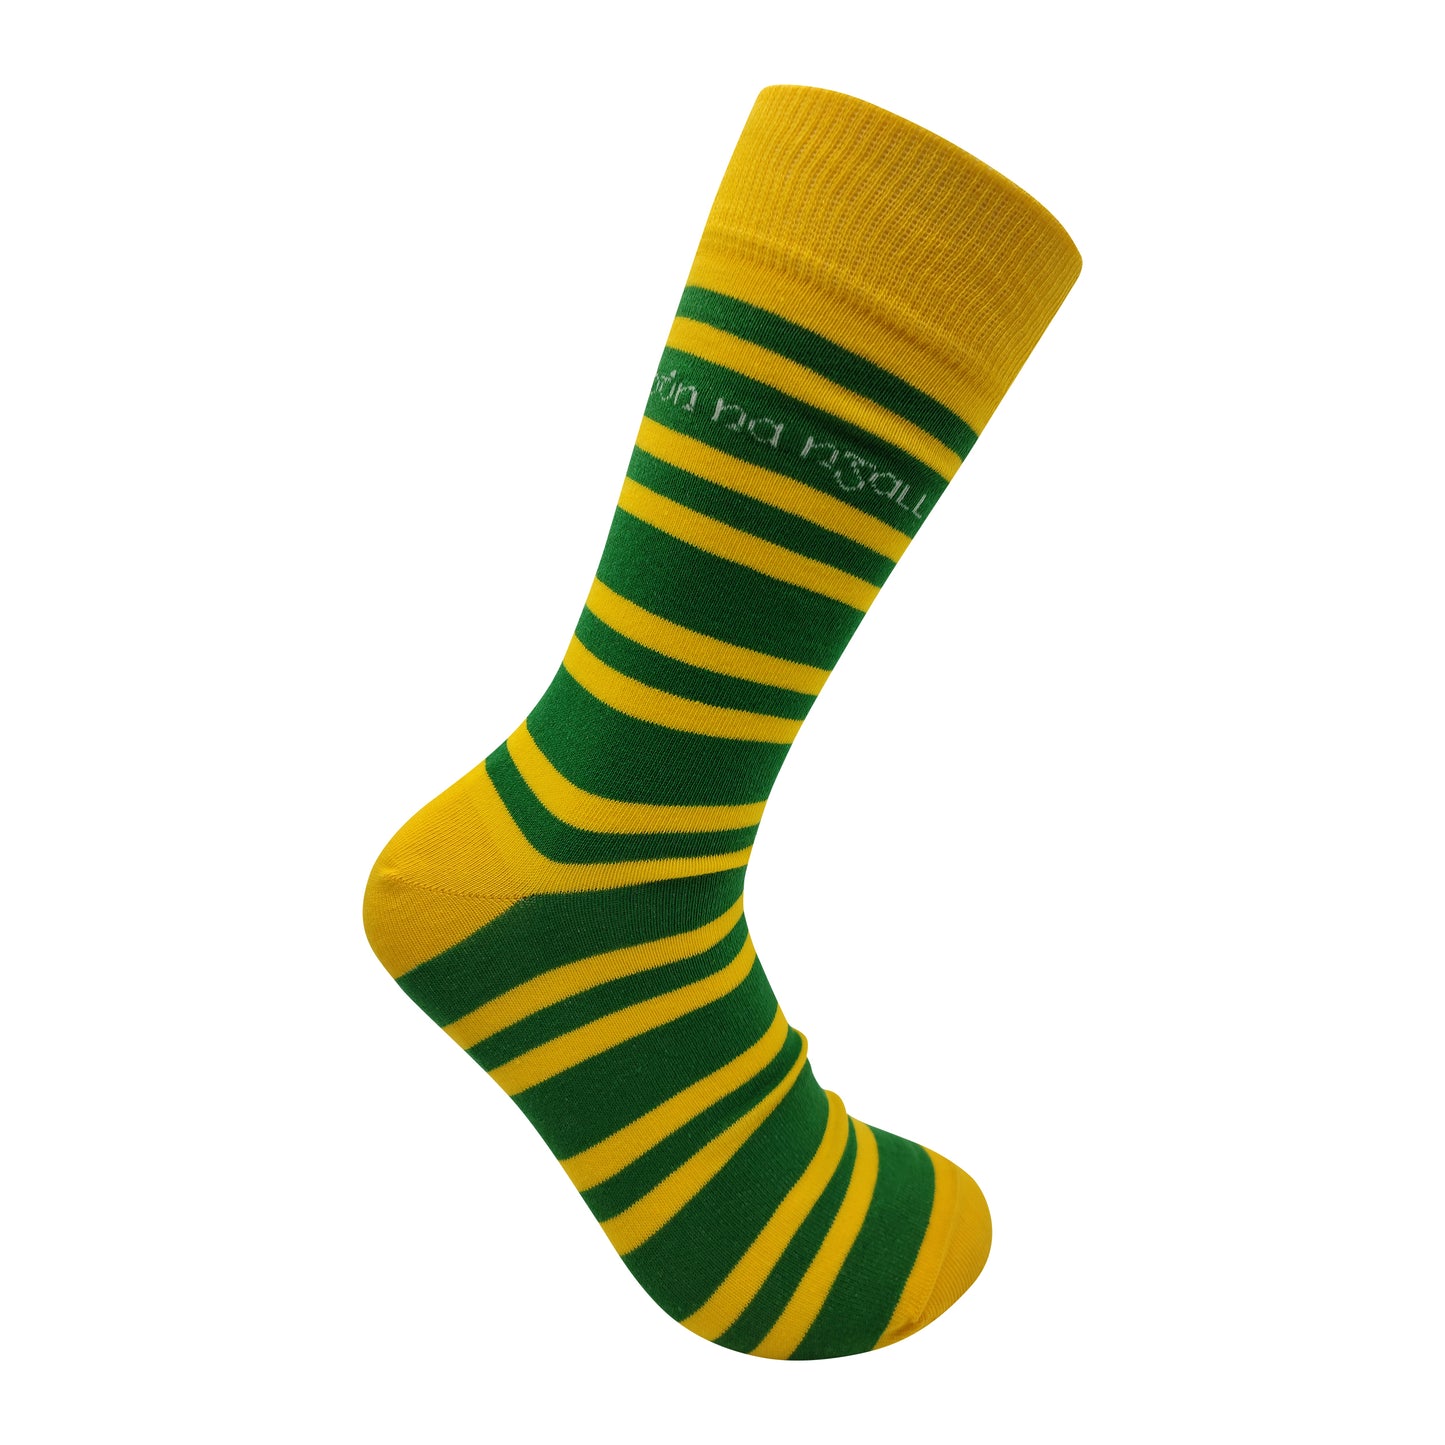 Donegal Retro Sock Gift Box | Signed By Michael Murphy | Size UK 7 - 11